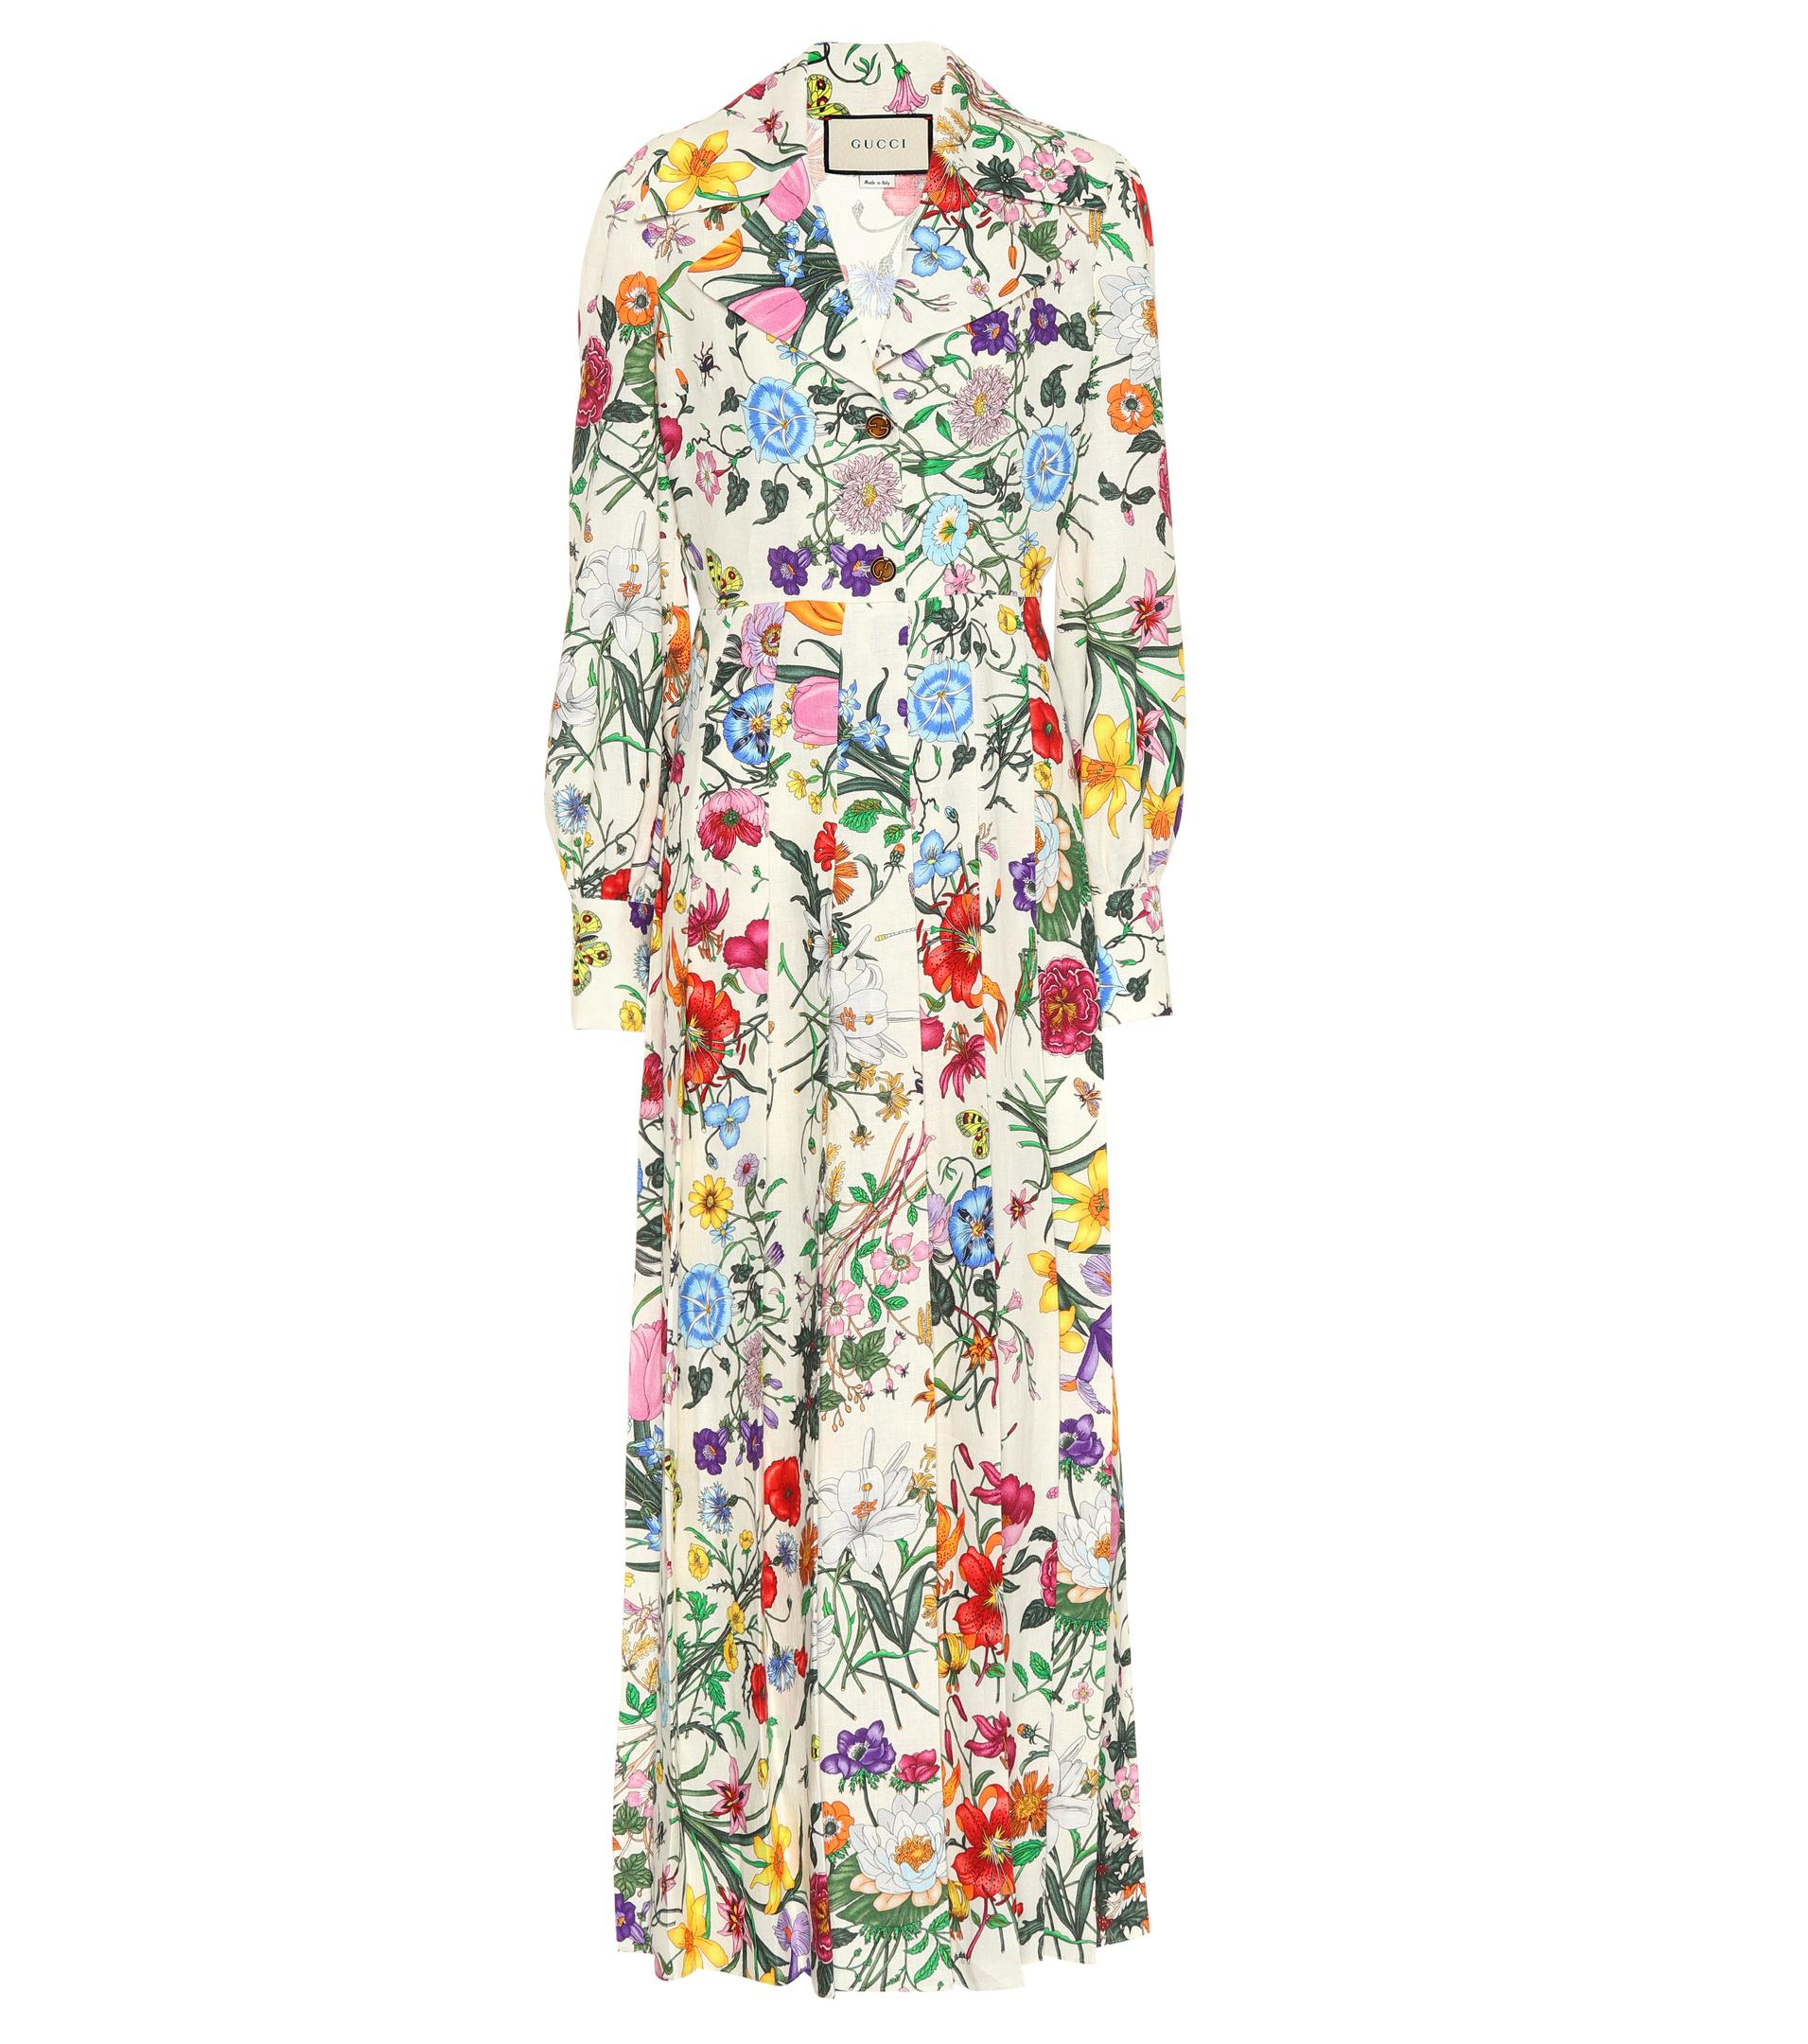 Gucci Floral-printed Linen Dress in Blue - Lyst